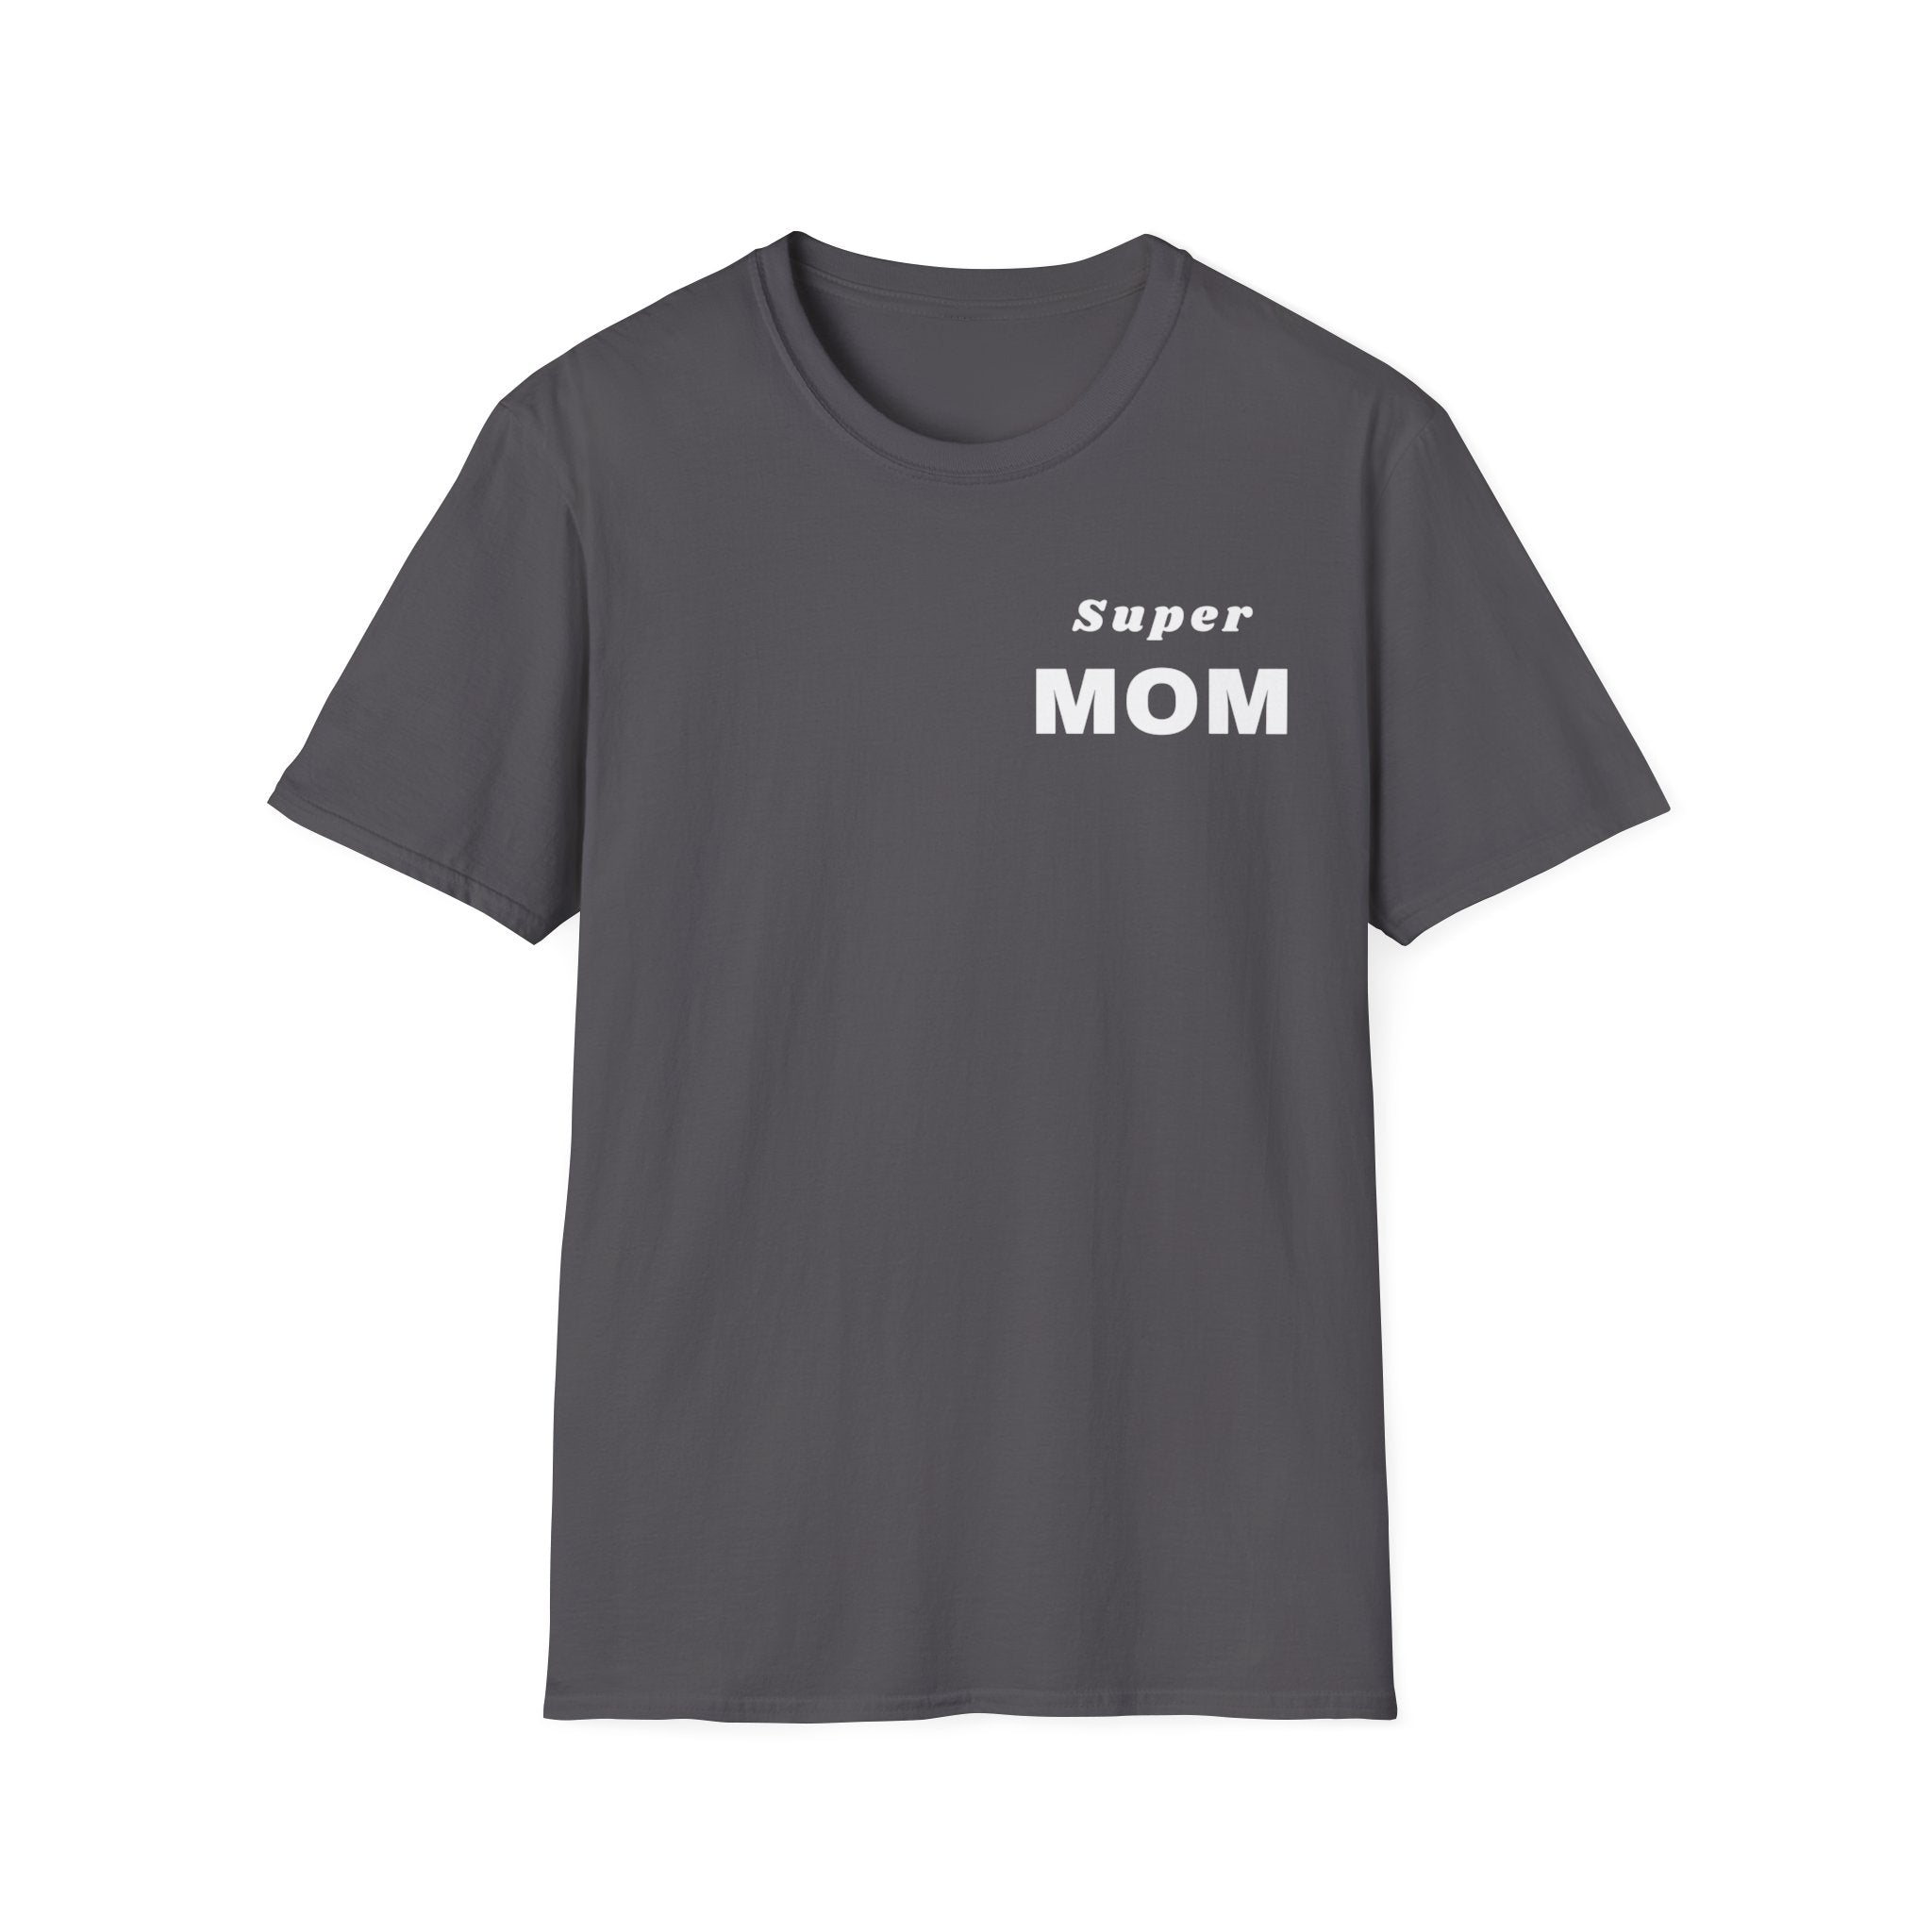 Super Mom Unisex Softstyle Crew Neck T-Shirt, Mother's Day Gift, Gift for Mom, Mom's Shirt